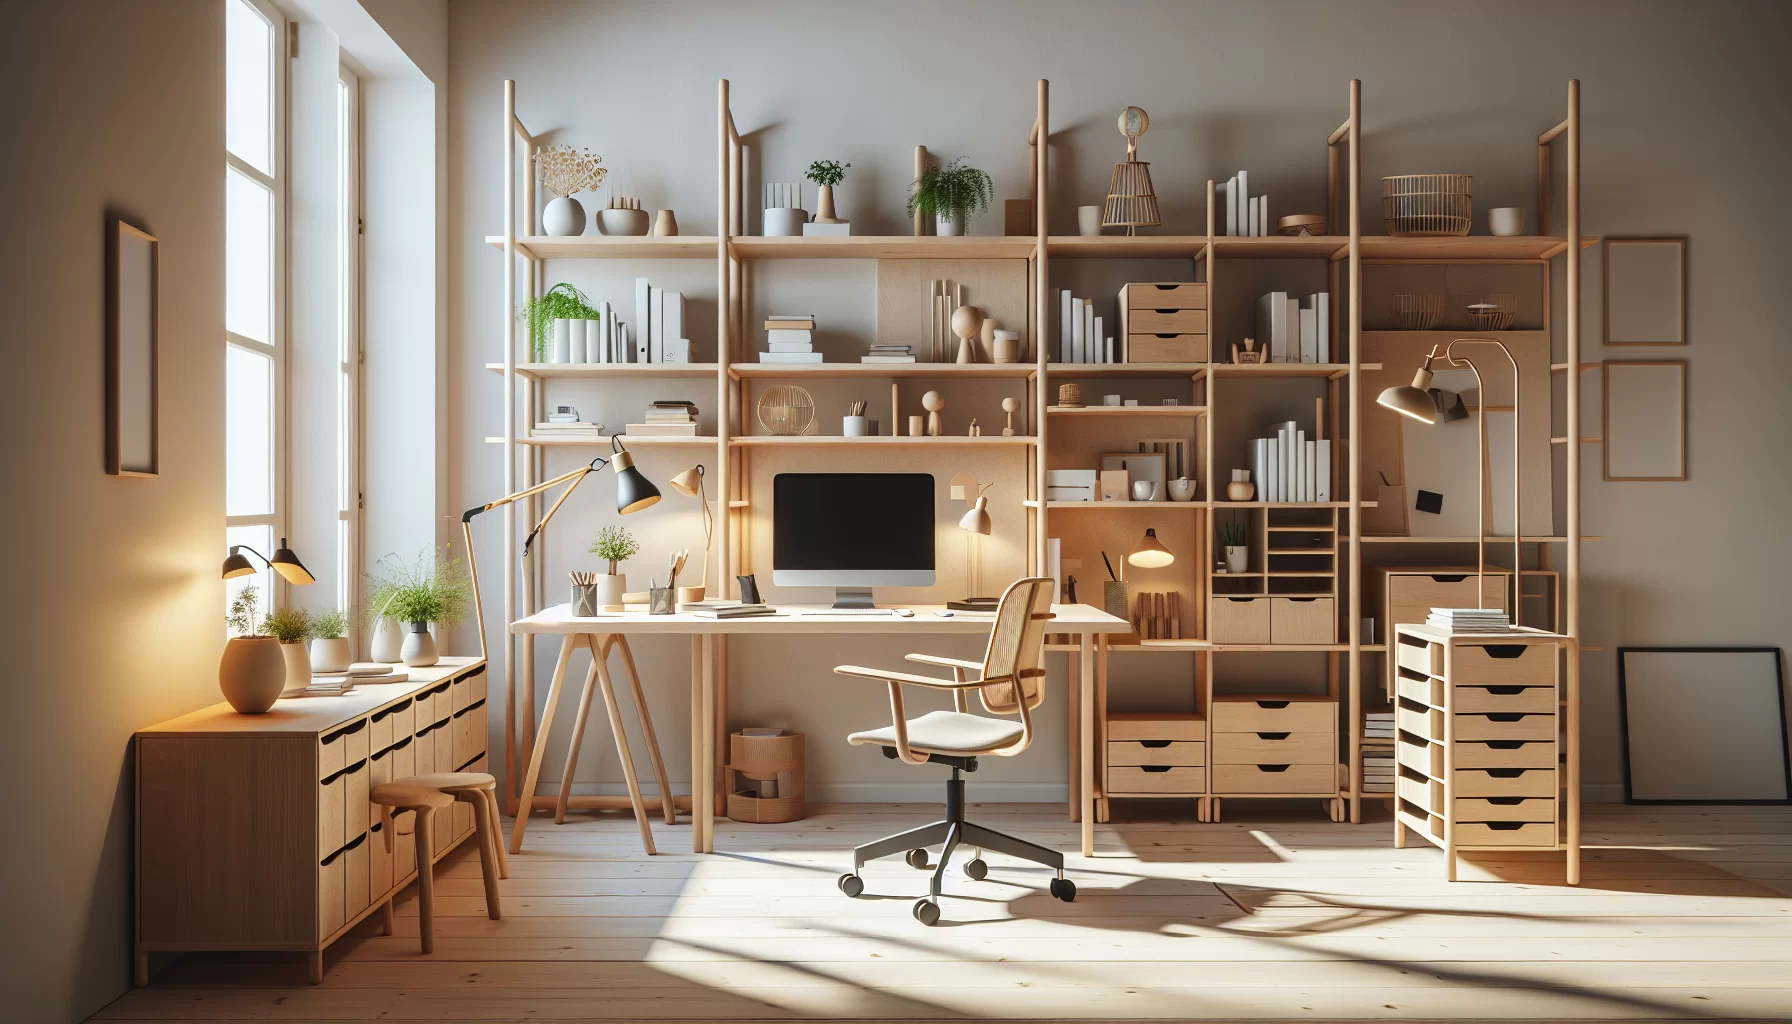 Transform your home office with IKEA for peak productivity